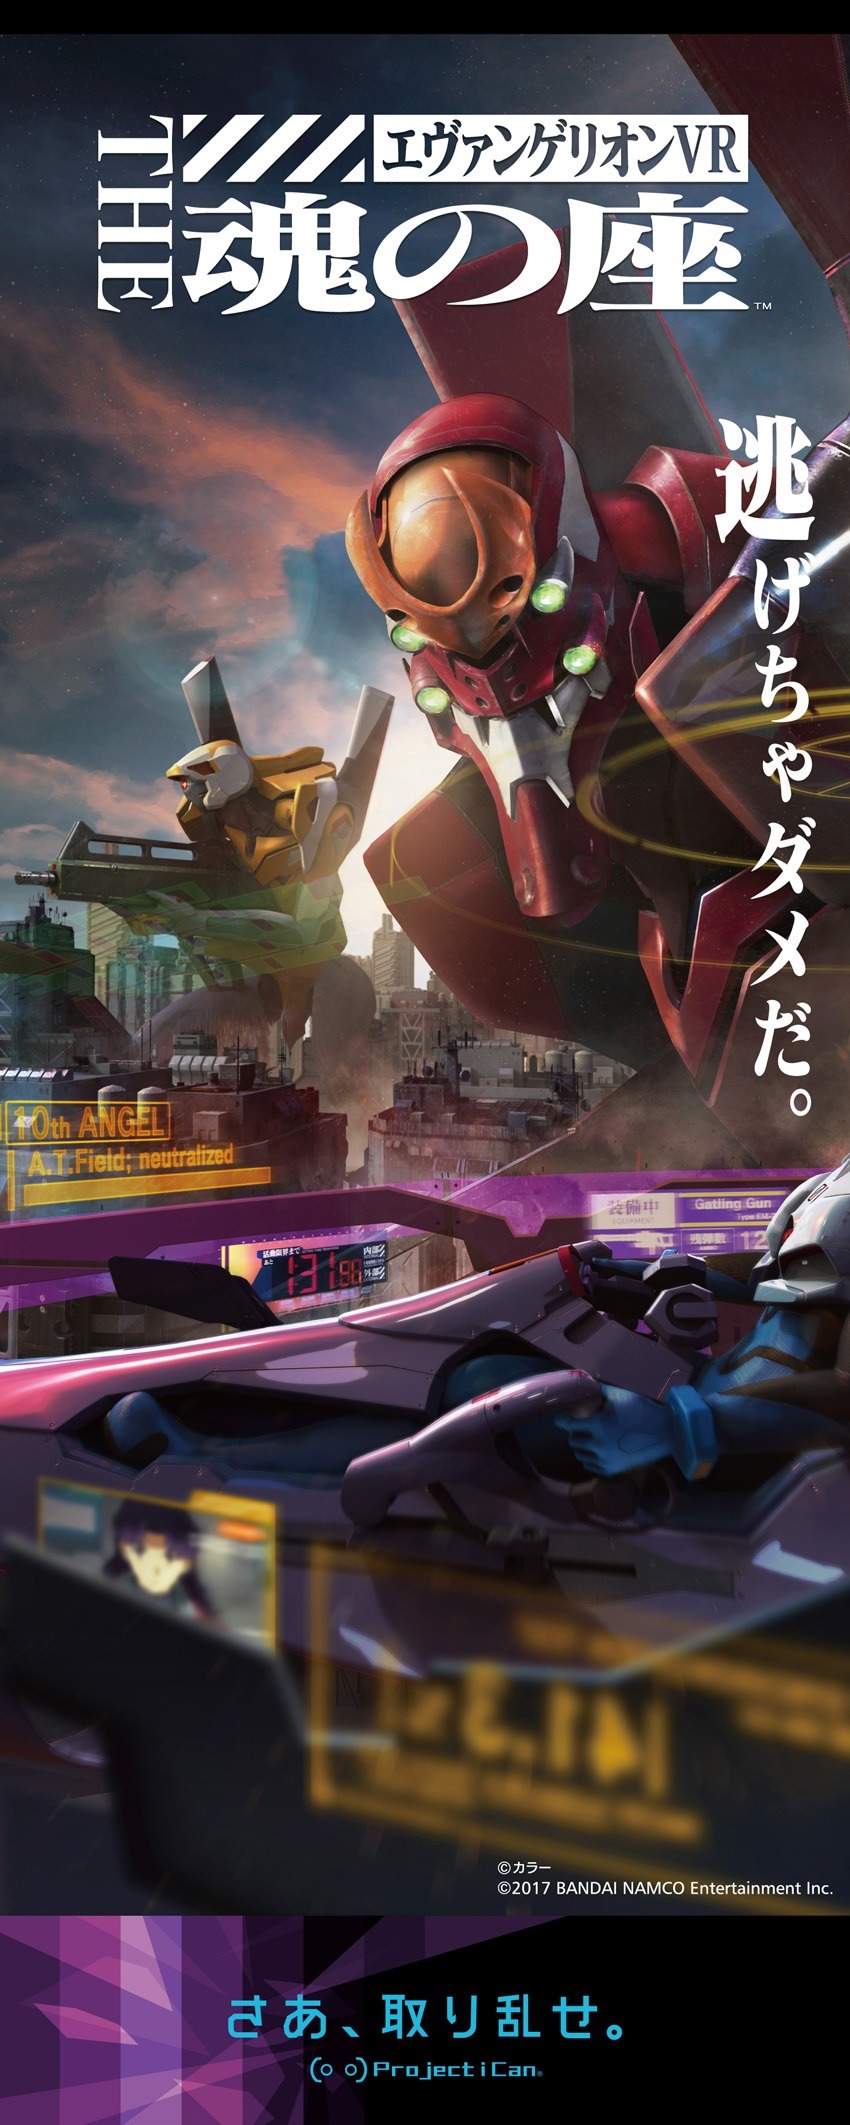 New Evangelion Vr Experience In Japan Will Let You Pilot An Eva And Fight Angels Siliconera